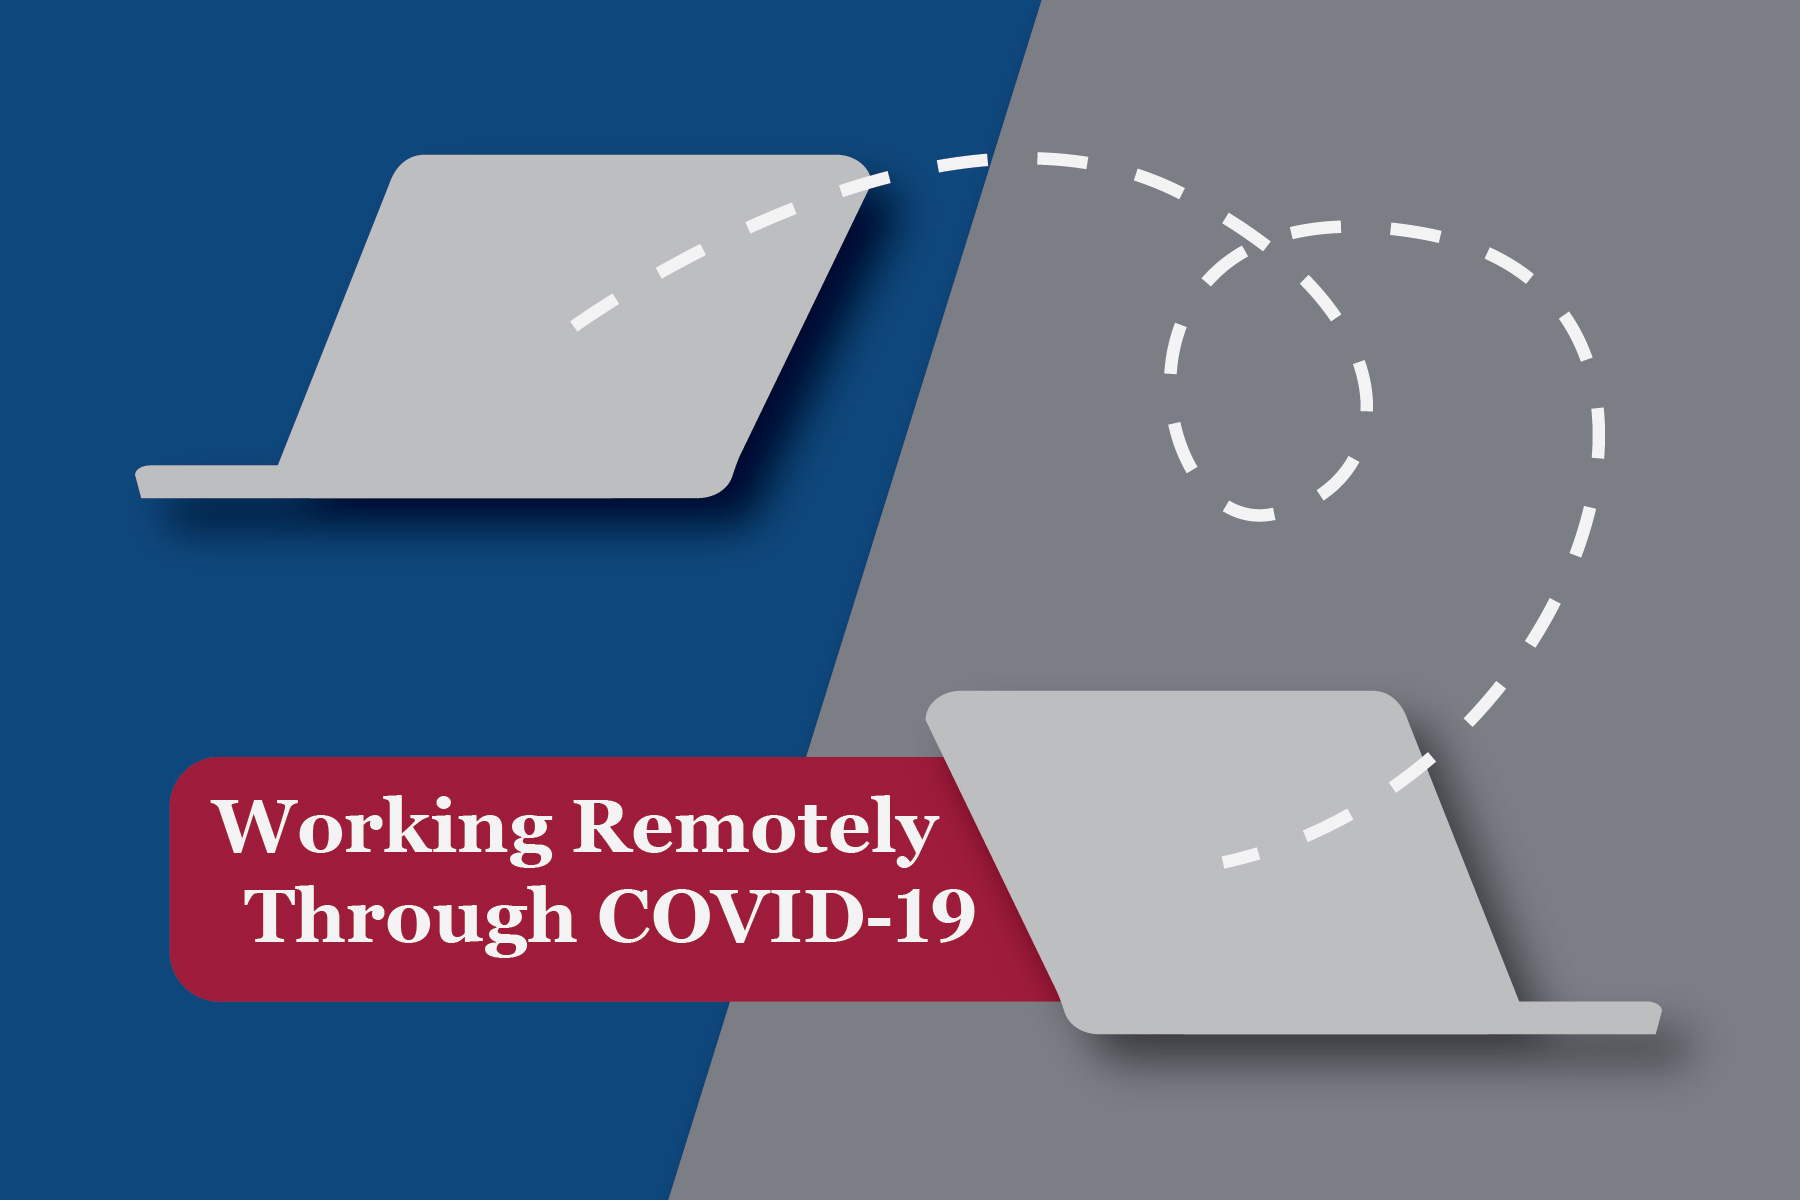 Working Remotely Through COVID-19